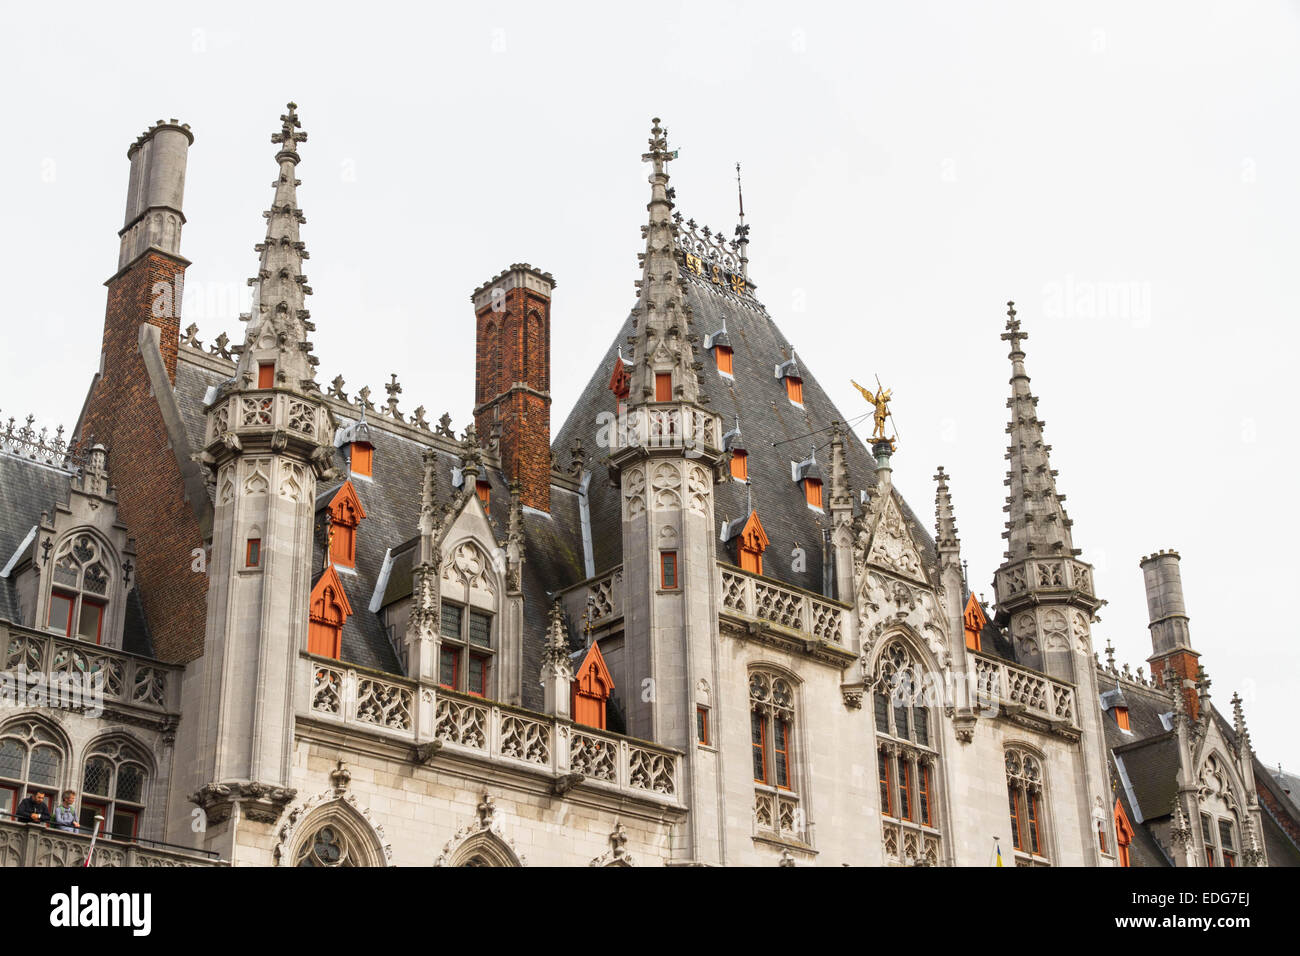 Looking up at detailed roof of Provincial Palace, Market Square, Bruges, West Flanders, Belgium, Europe. Stock Photo